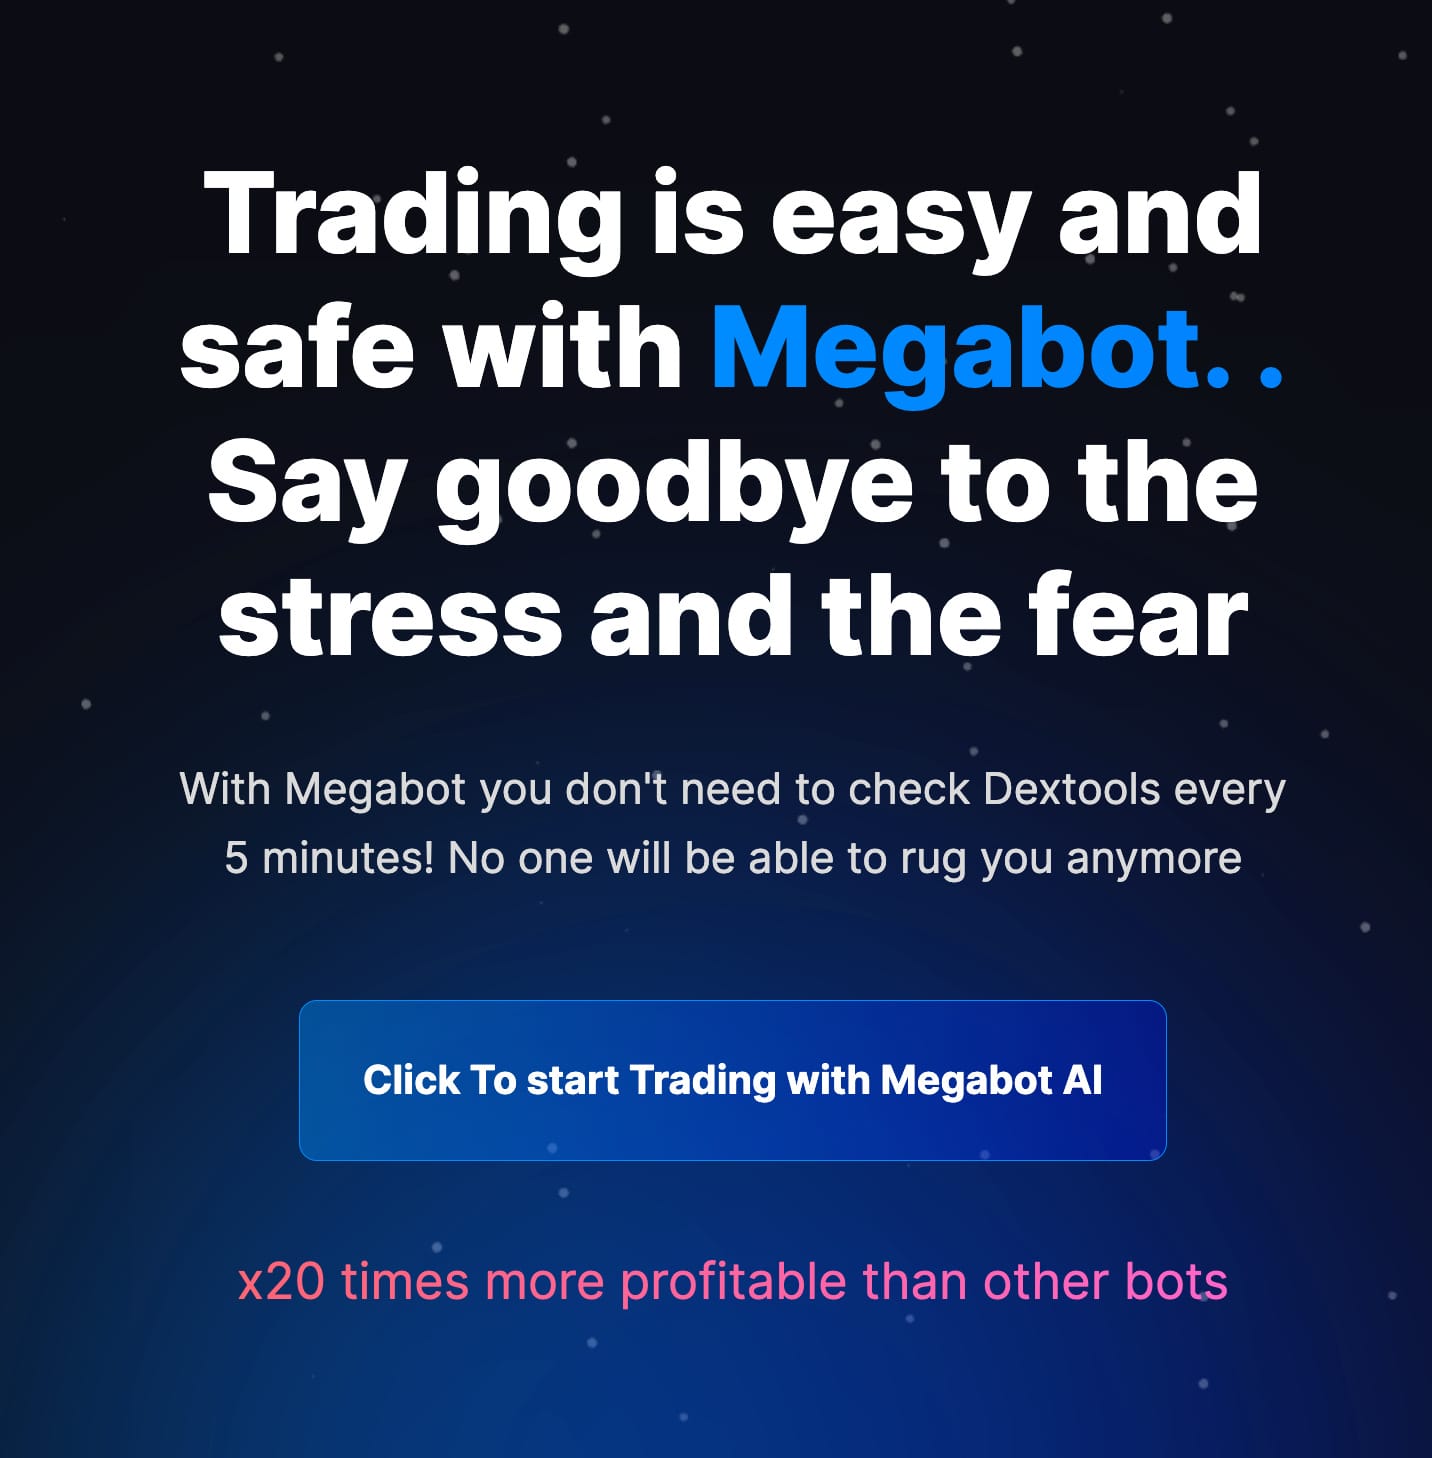 Trading is easy and safe with Megabot. . Say goodbye to the stress and the fear With Megabot you don't need to check Dextools every 5 minutes! No one will be able to rug you anymore  Click To start Trading with Megabot AI x20 times more profitable than other bots